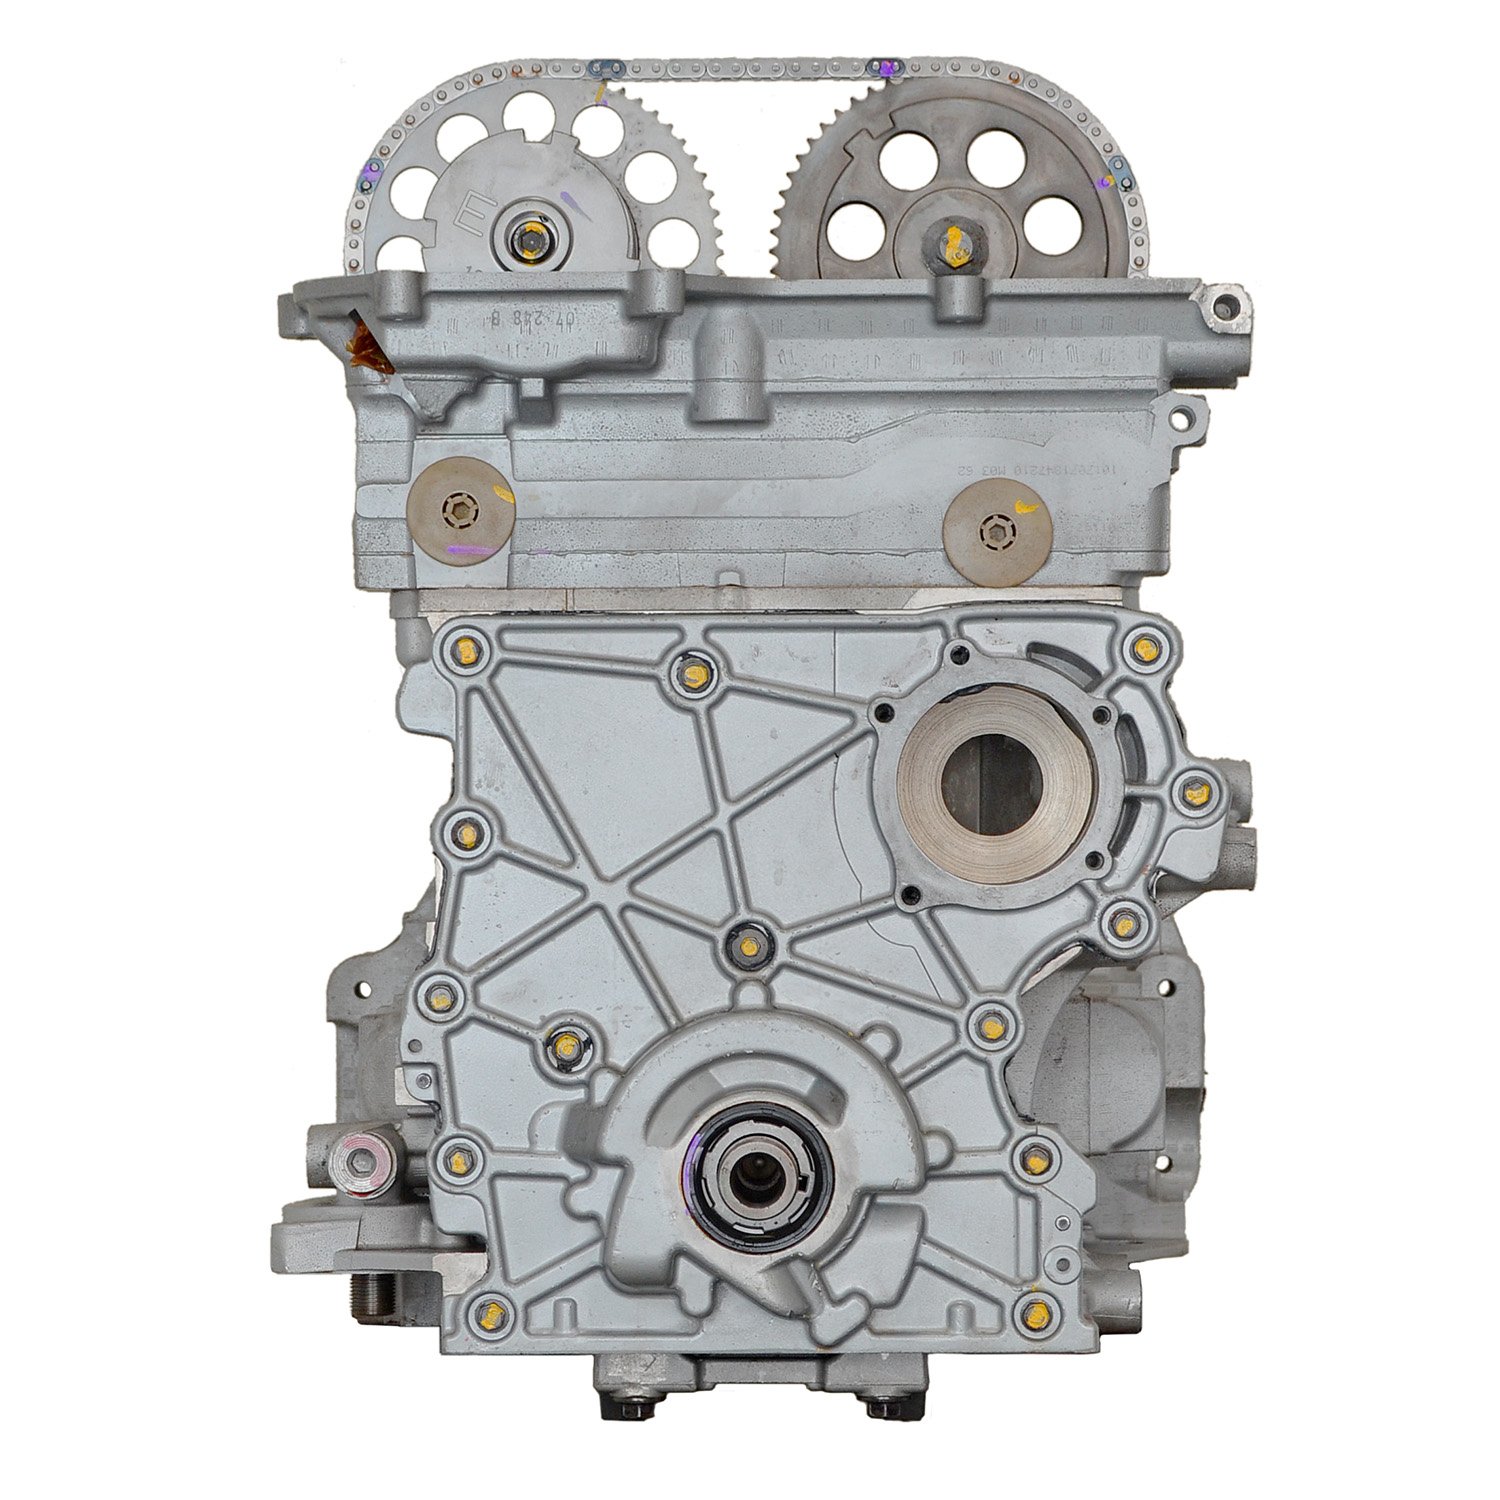 Remanufactured Crate Engine for 2008-2012 Chevy Colorado &